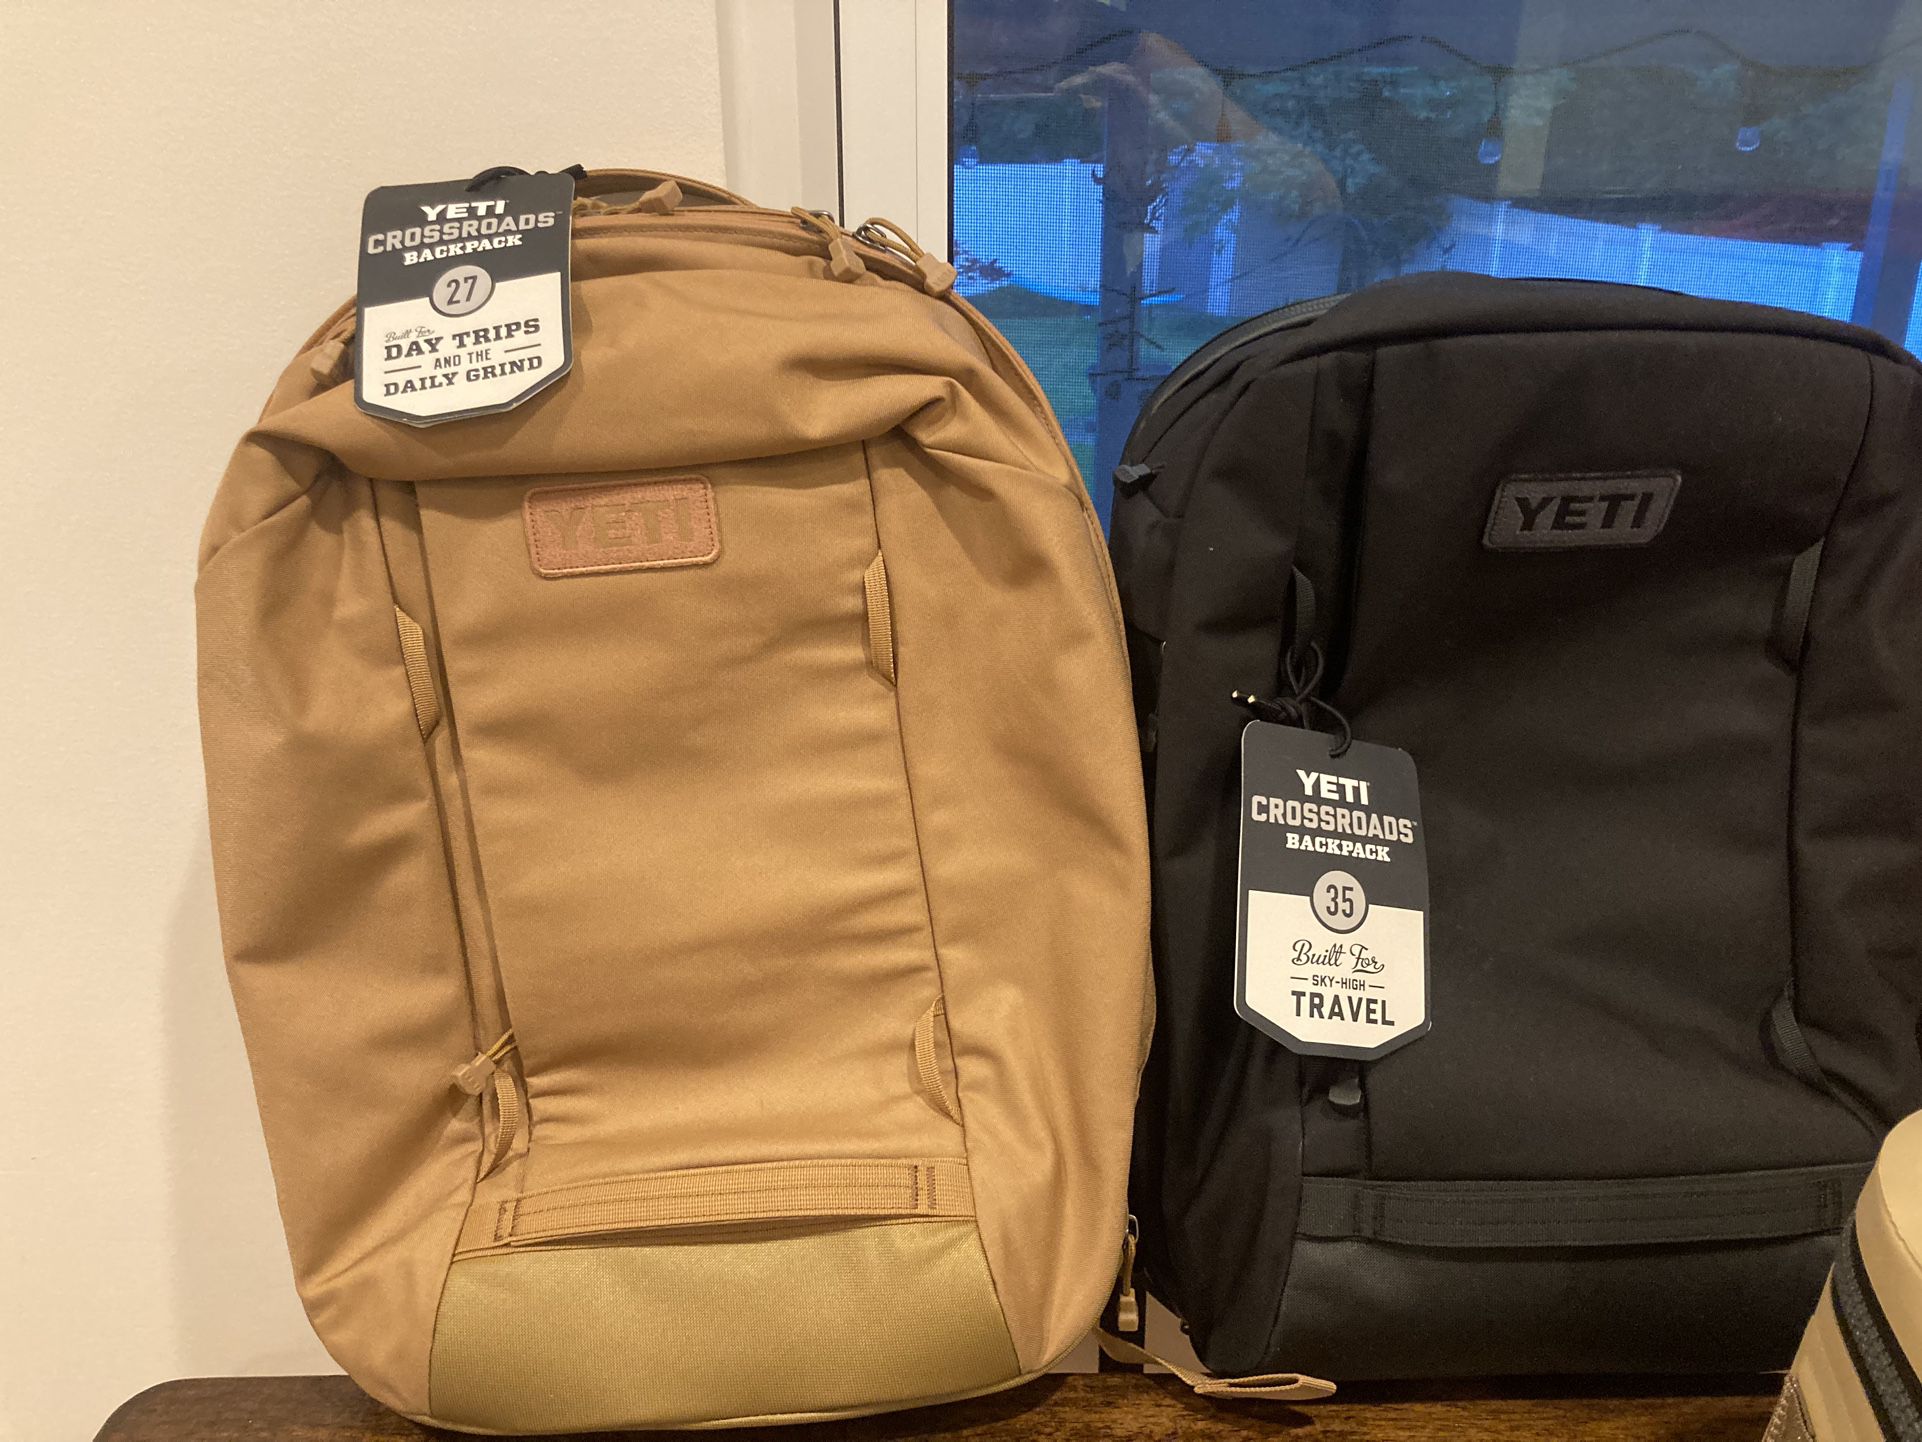 Brand NEW Yeti Crossroads 27L Backpack Blue - general for sale - by owner -  craigslist